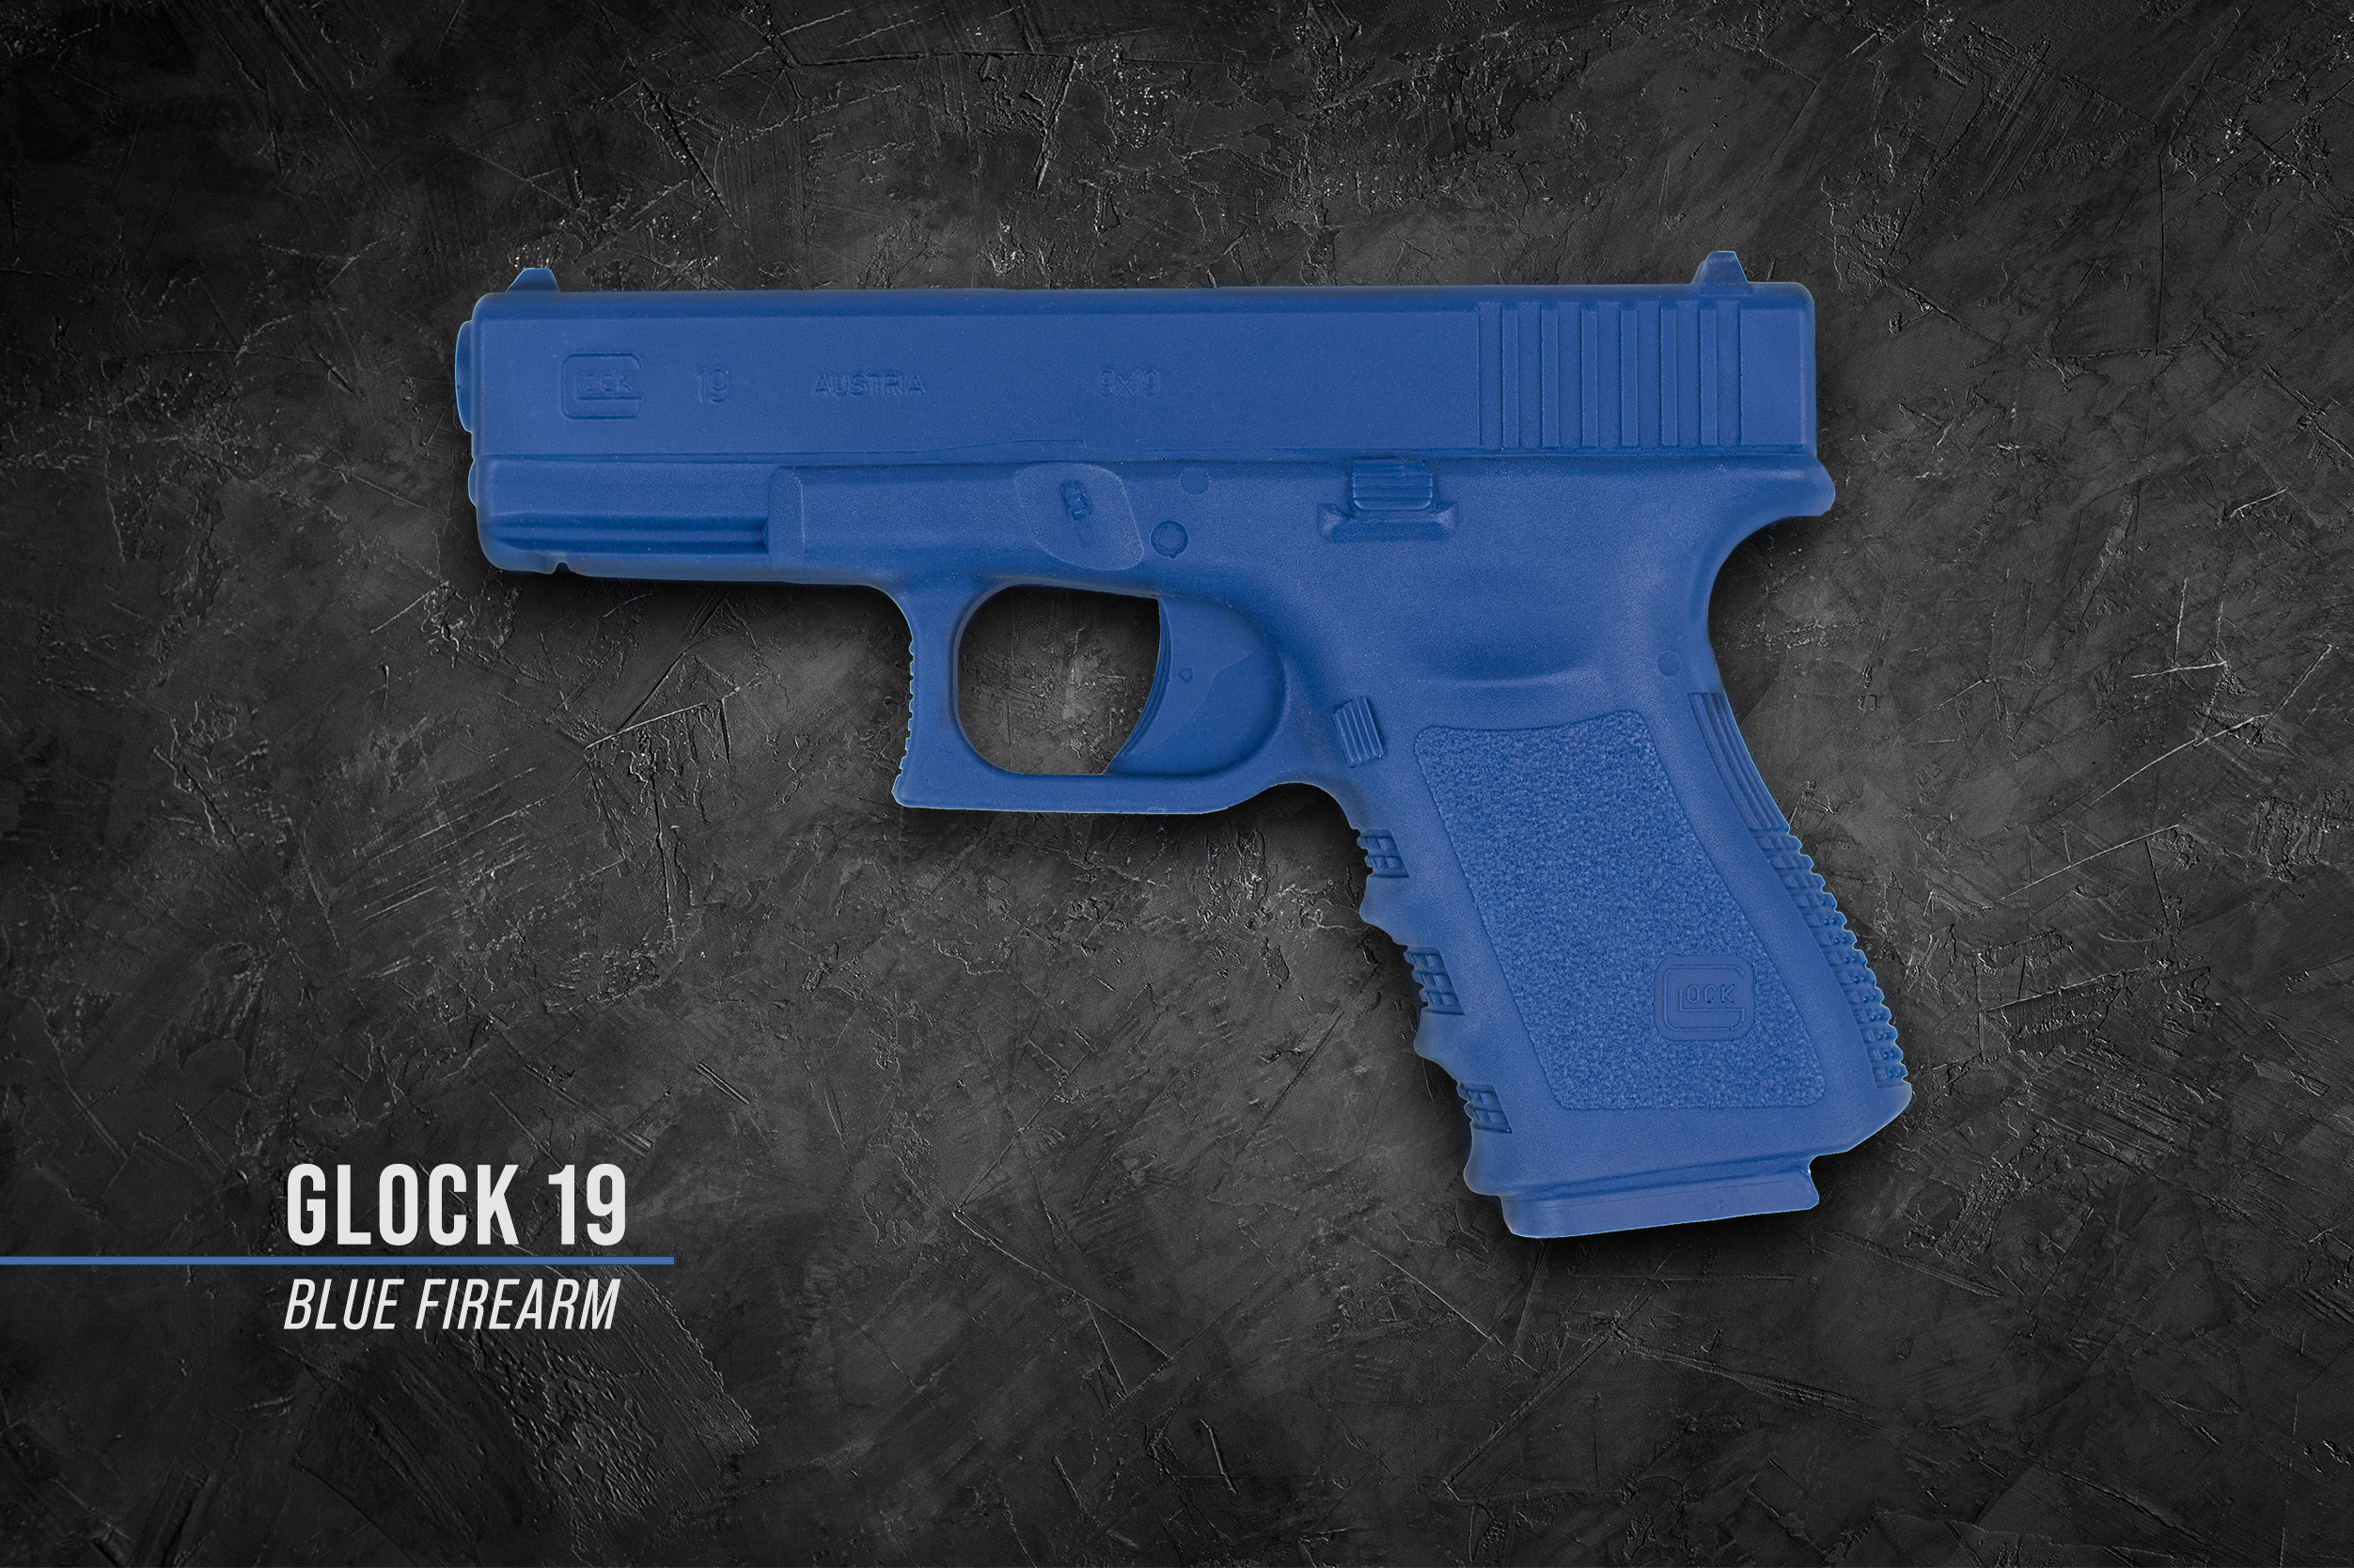 Blue Firearm - Glock 19 for training while pregnant